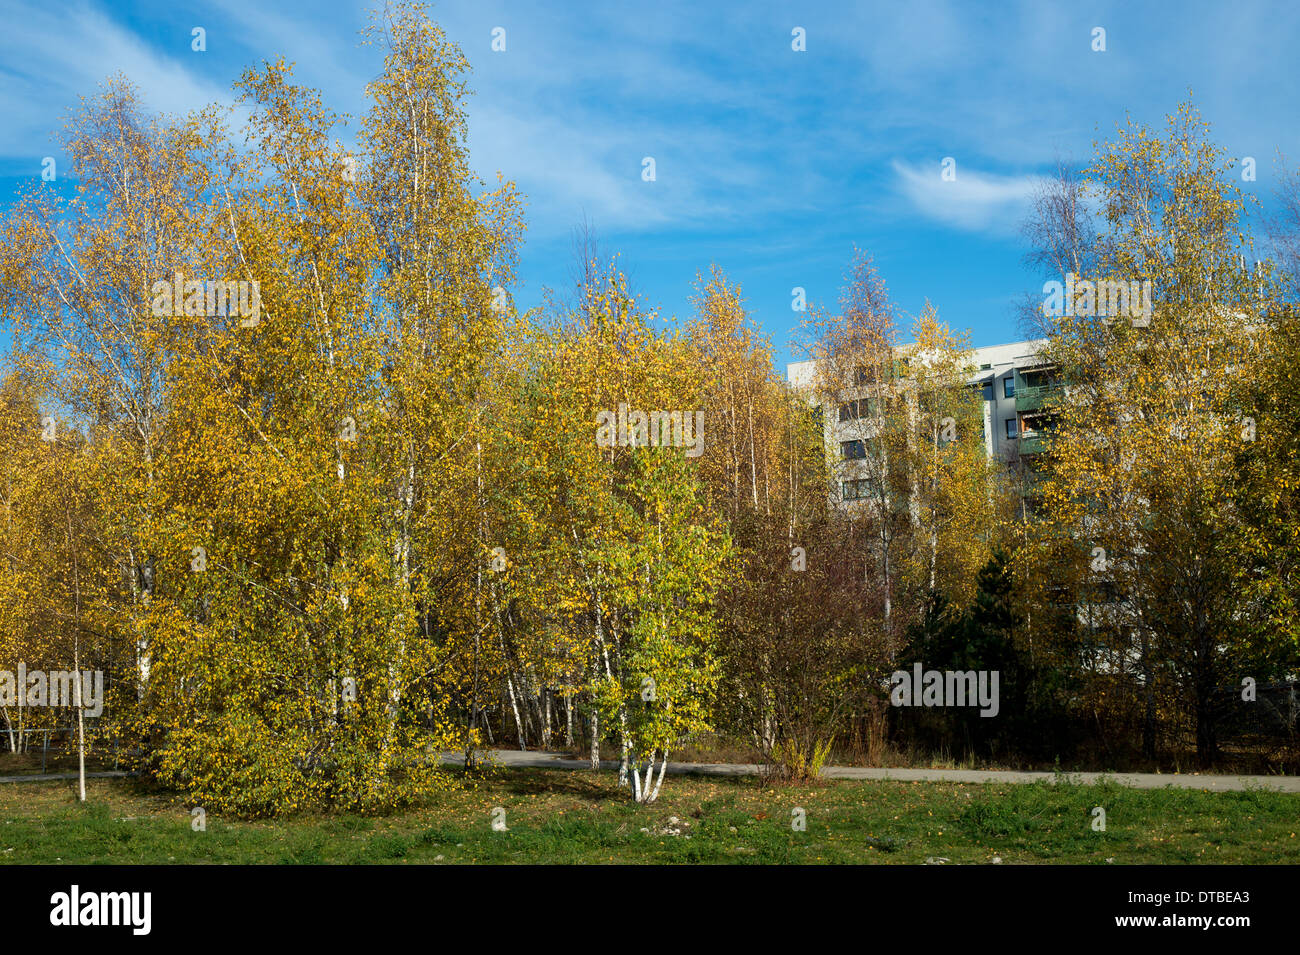 Berlin, Germany , birch trees with autumn-colored leaves in Mauerpark Stock Photo